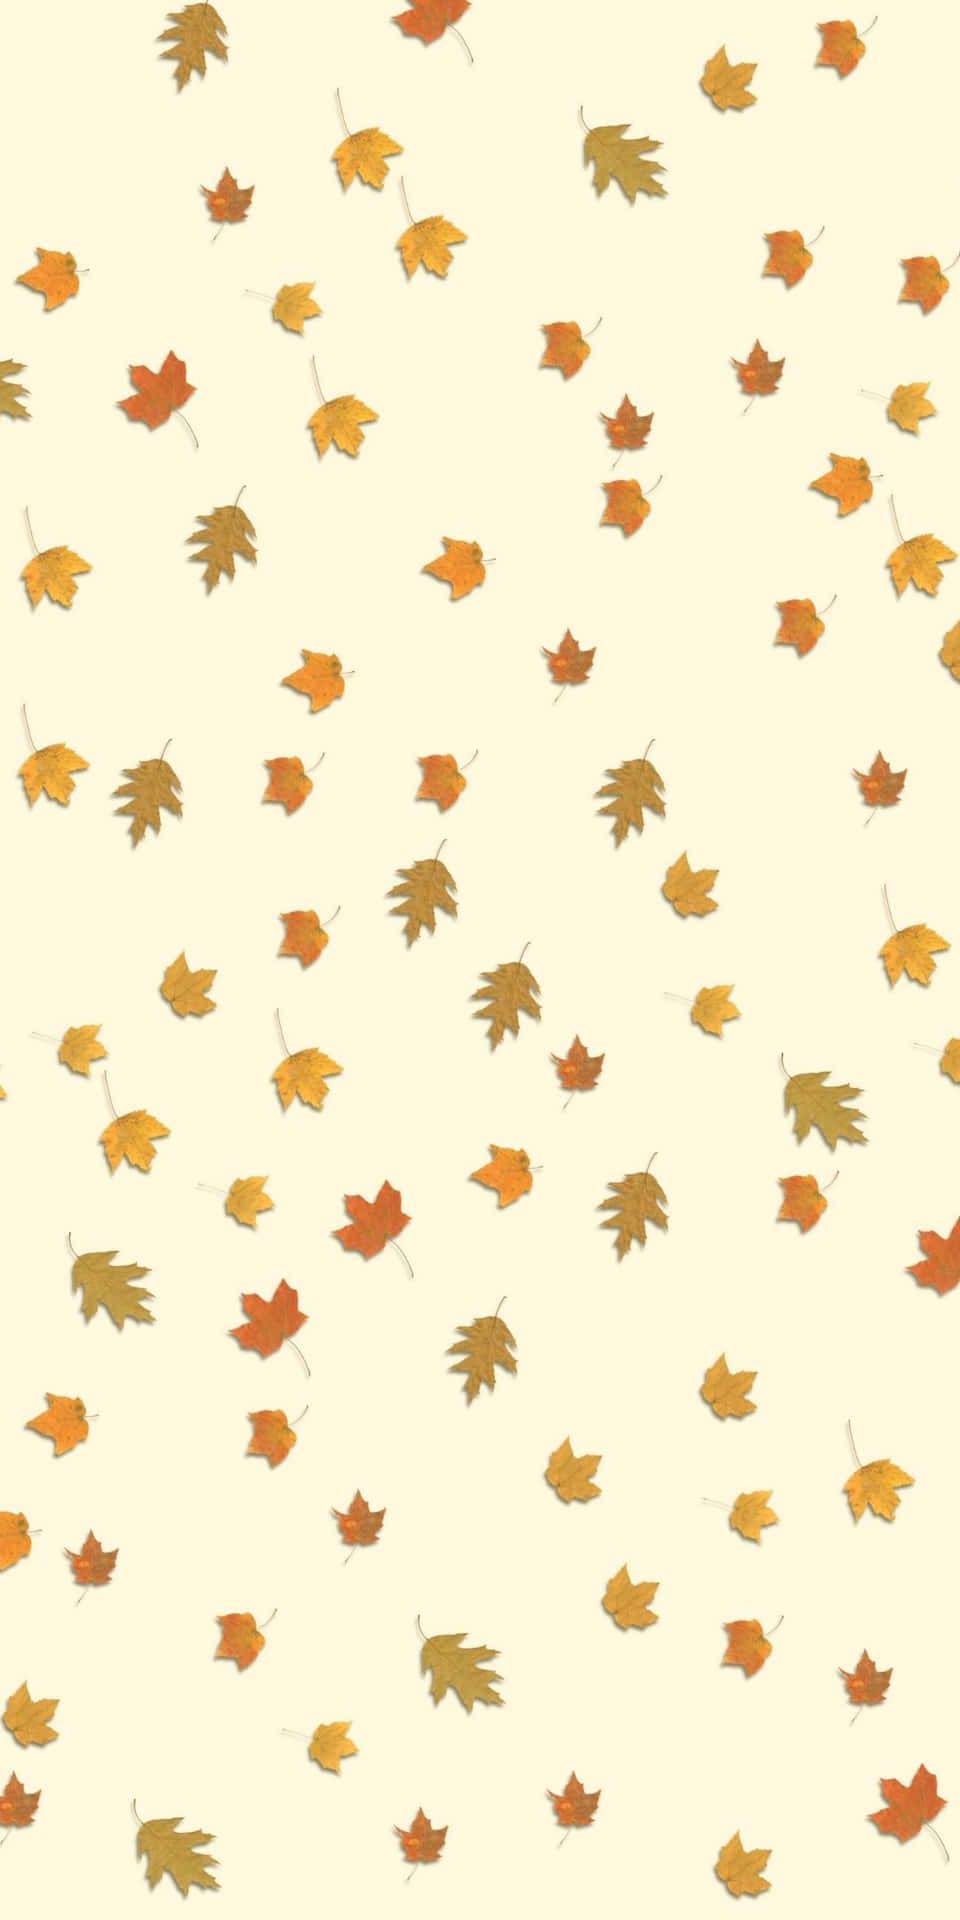 A cute background for the fall season - Android